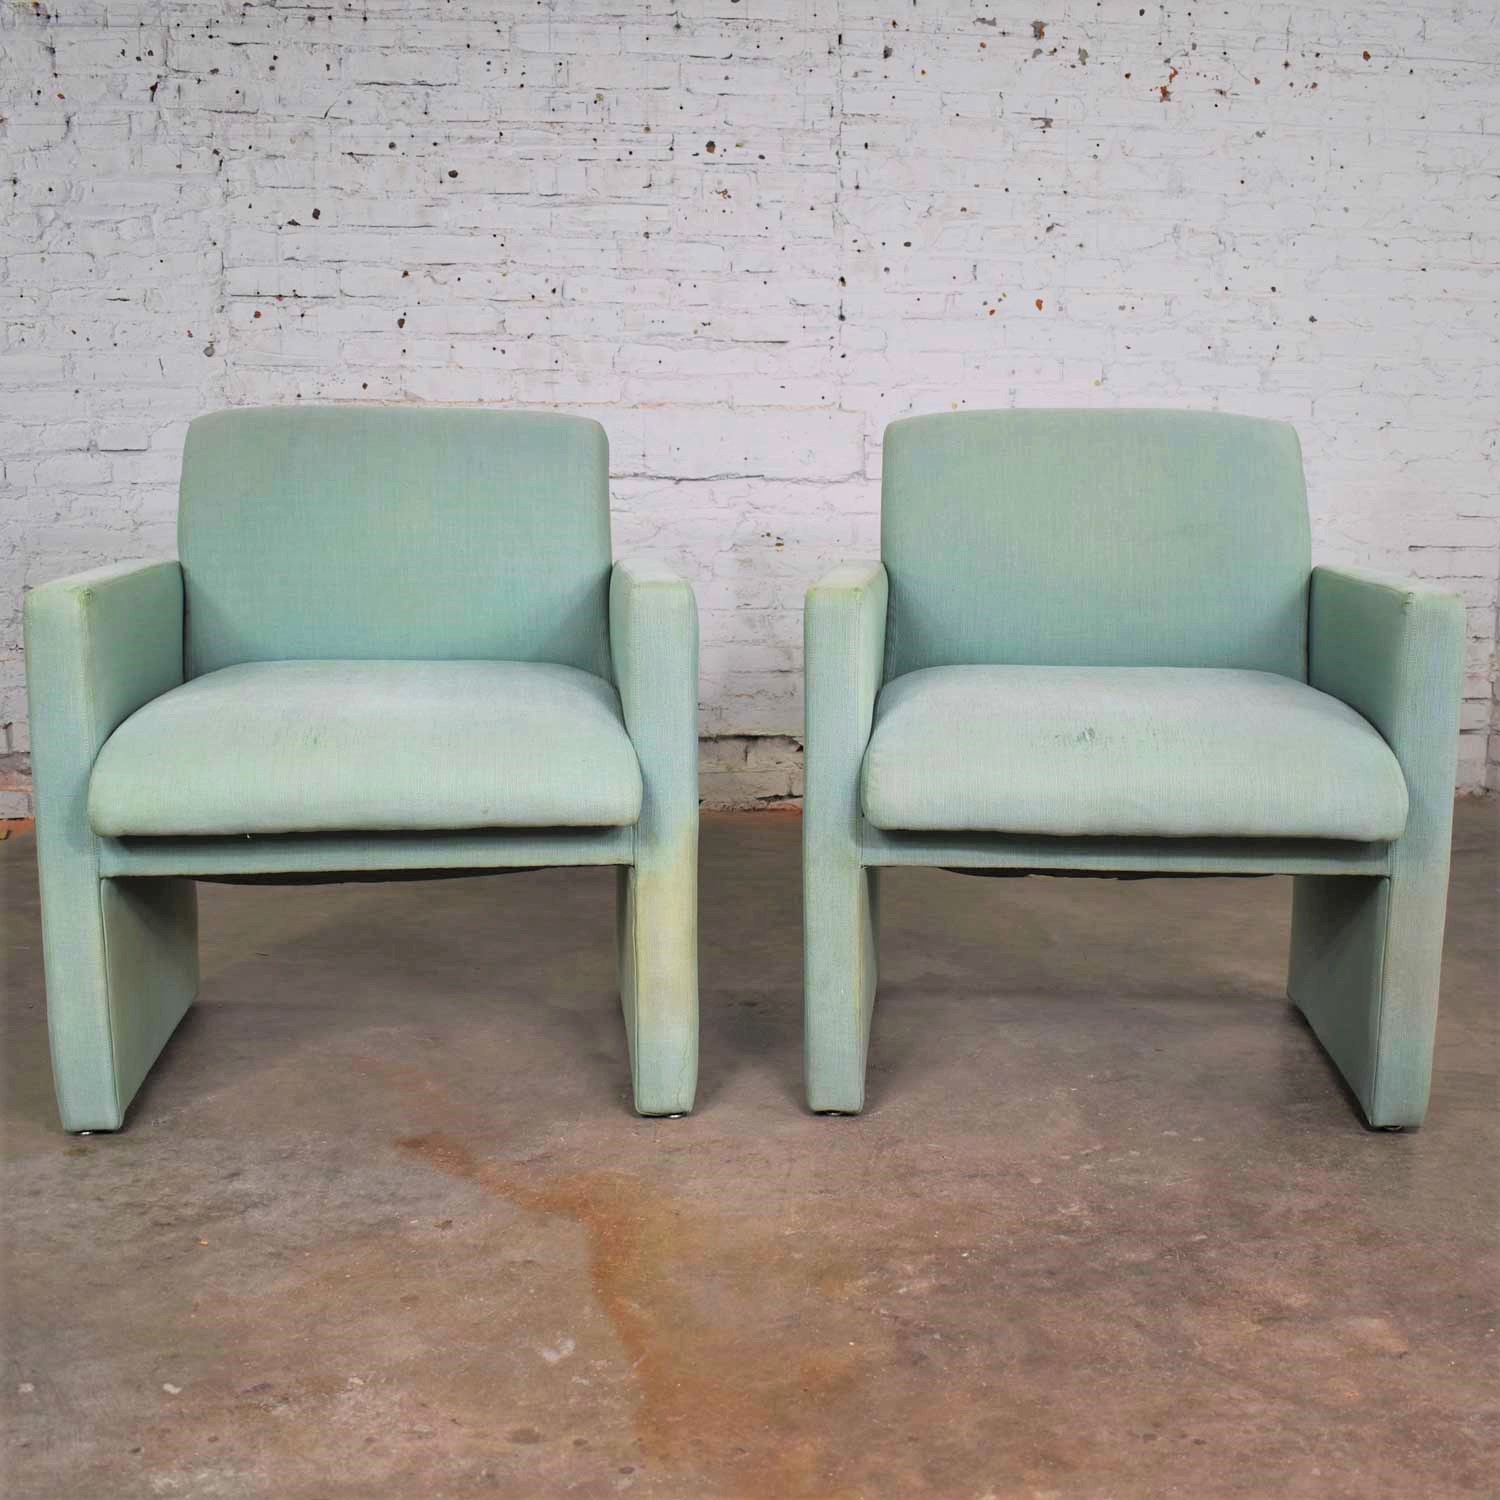 Pair of Petite Modern Accent Chairs in Sea Green